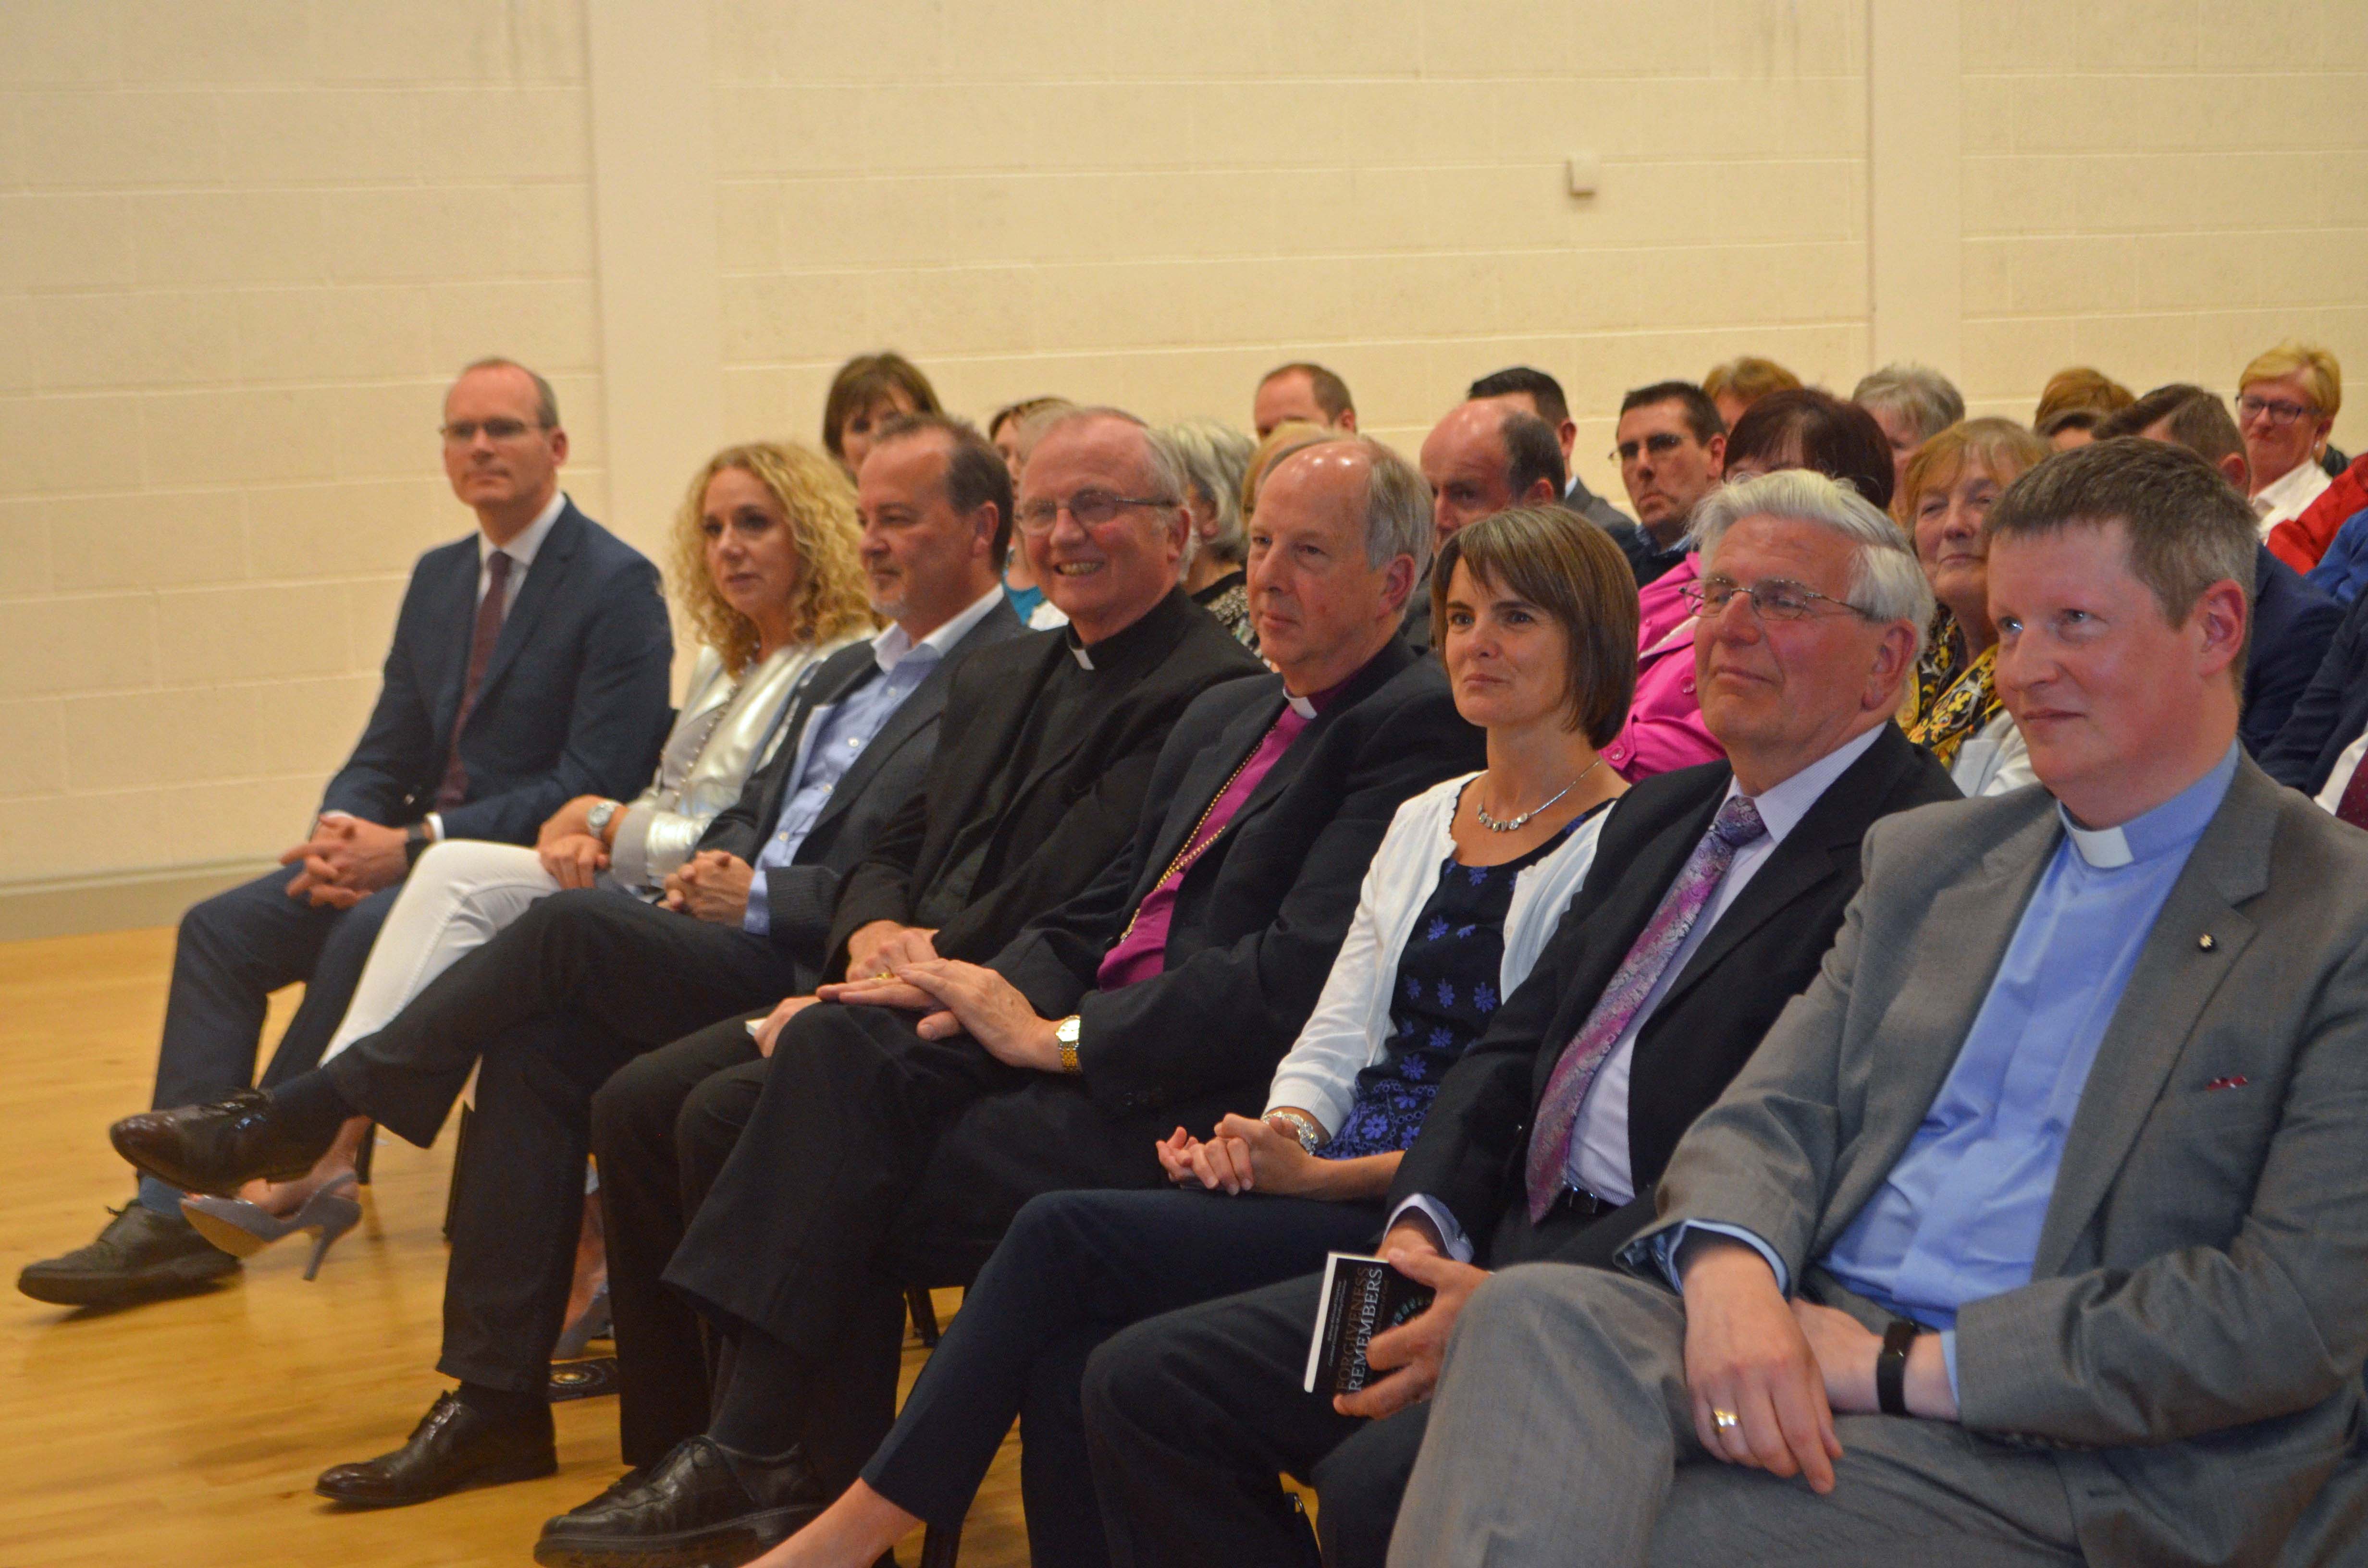 Left to right: Minister Simon Coveney T.D., Mrs Lesley Macaulay, Mr Tony Macaulay, Bishop Donal McKeown, Bishop Ken Good, Mrs Alison Miller, Mr Robert Miller Snr, and Archdeacon Robert Miller at the launch of ‘Forgiveness Remembers'.